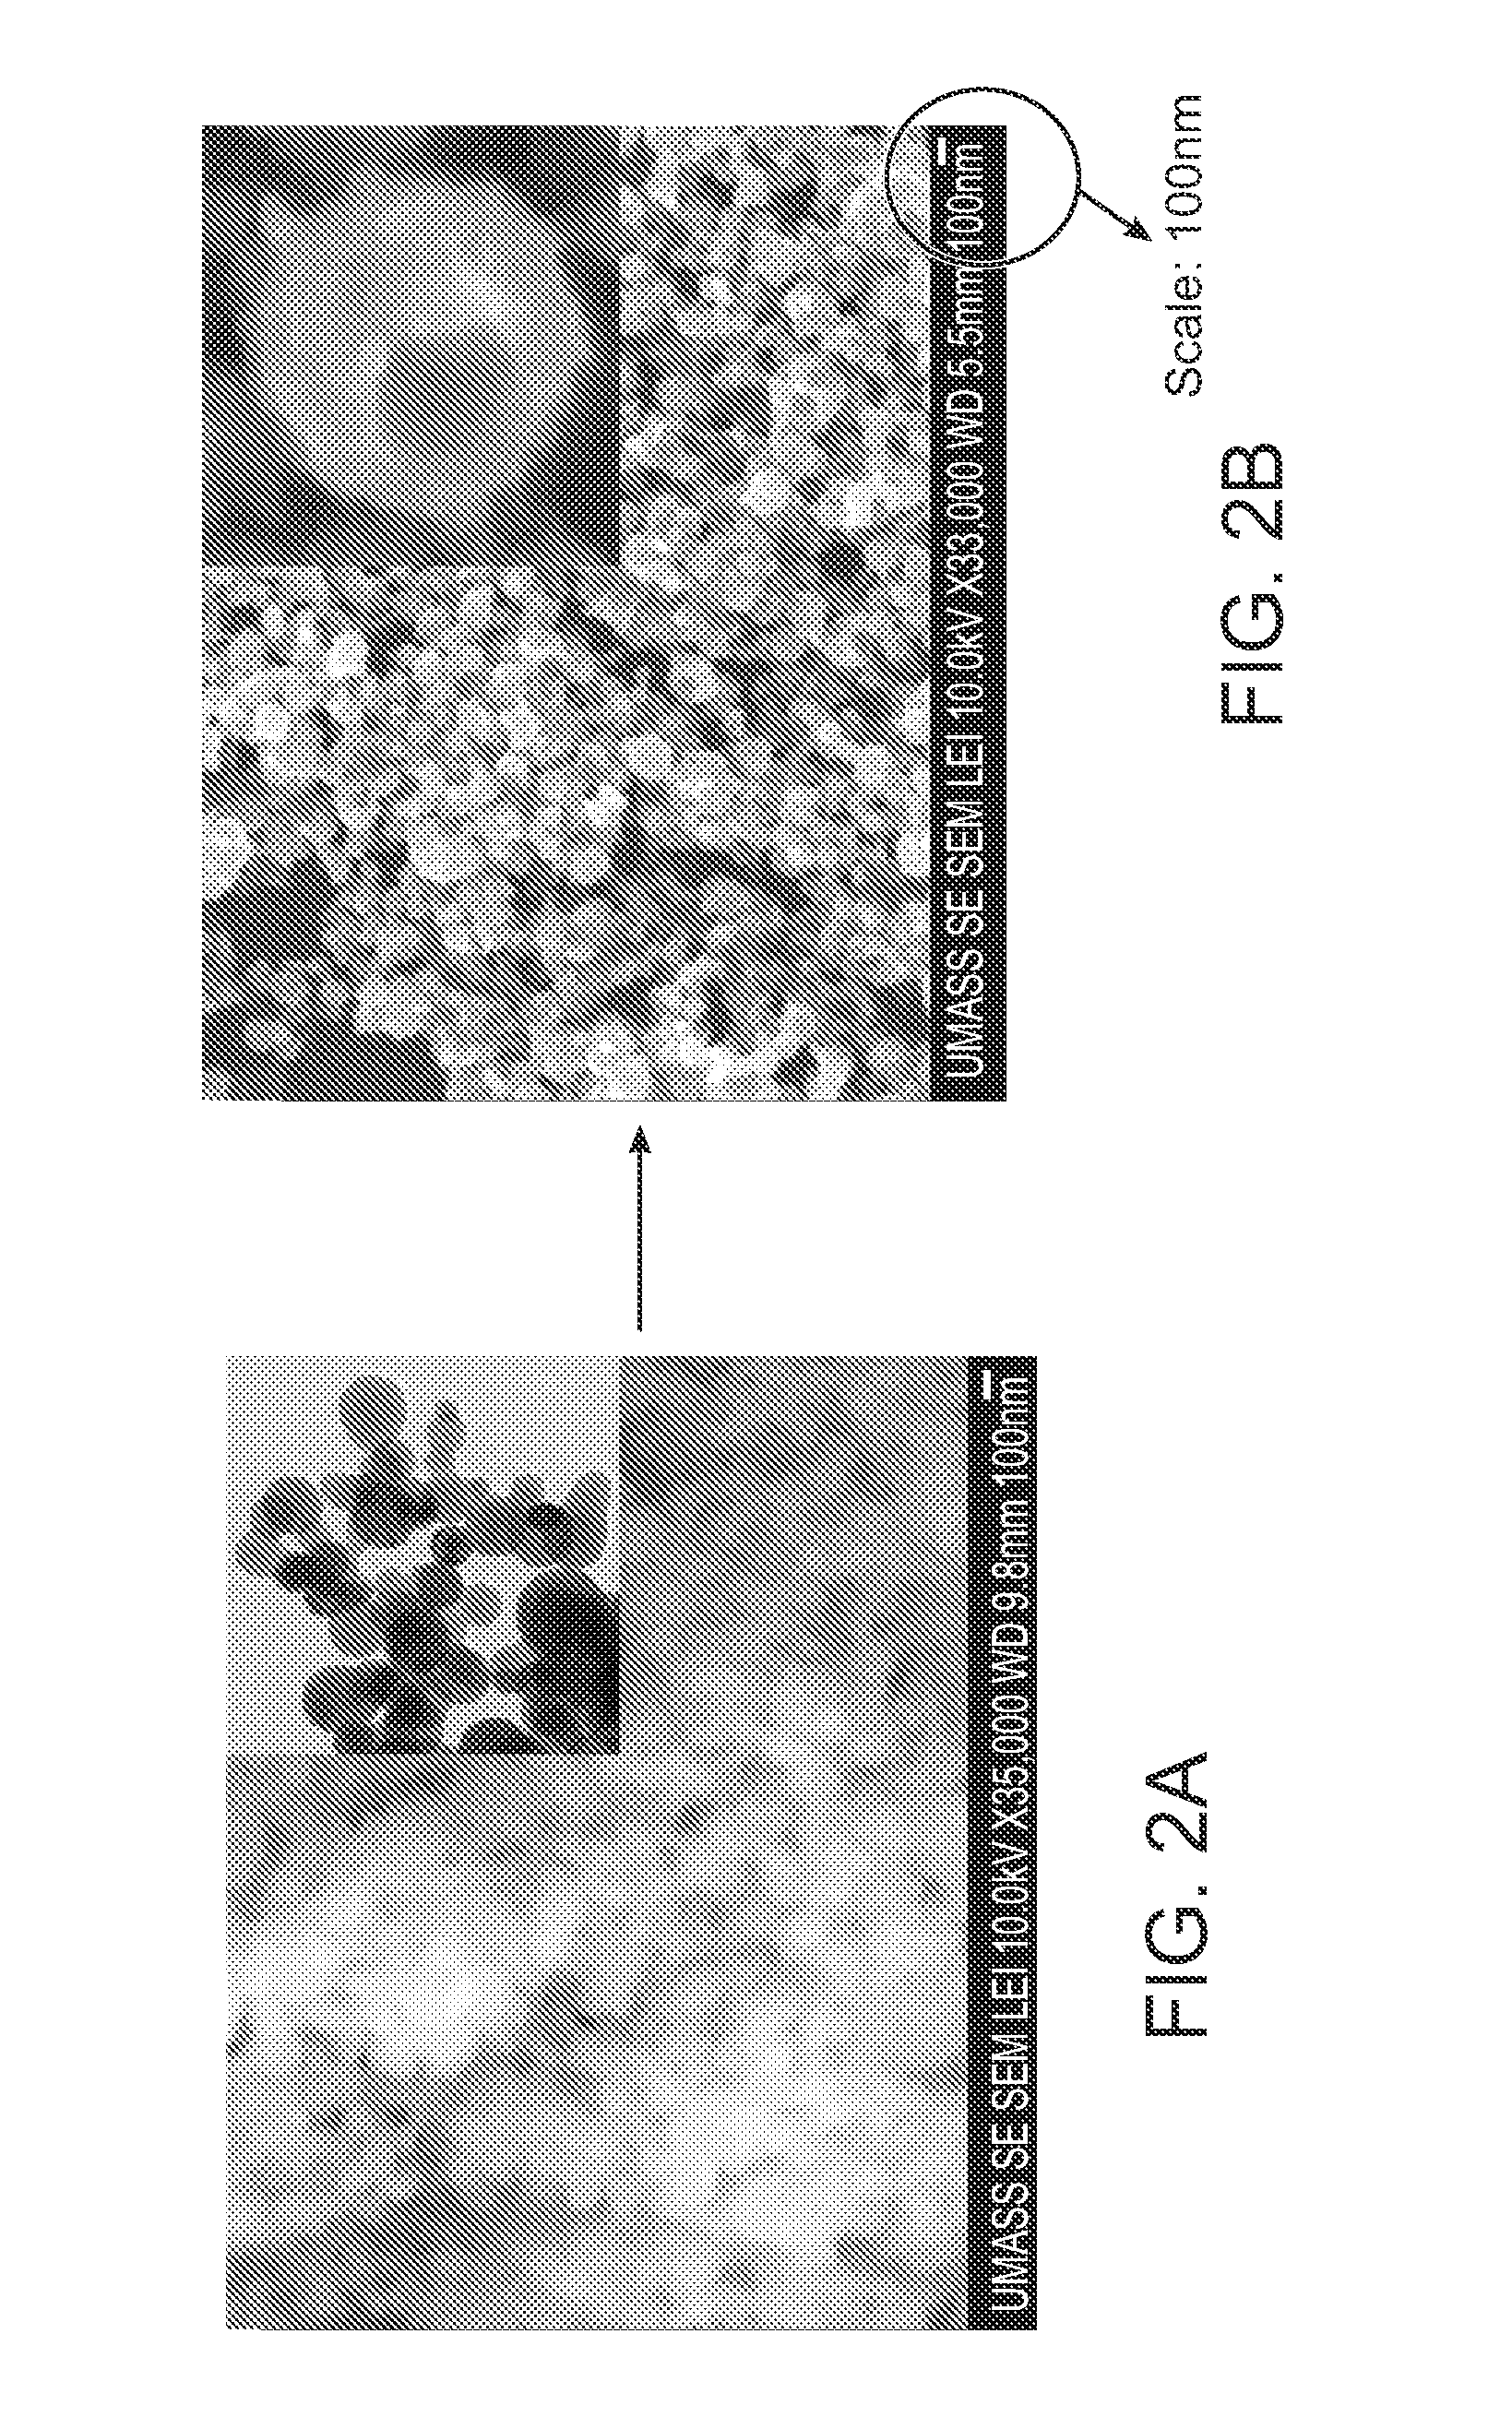 Methods for the fabrication of nanostructures heating elements